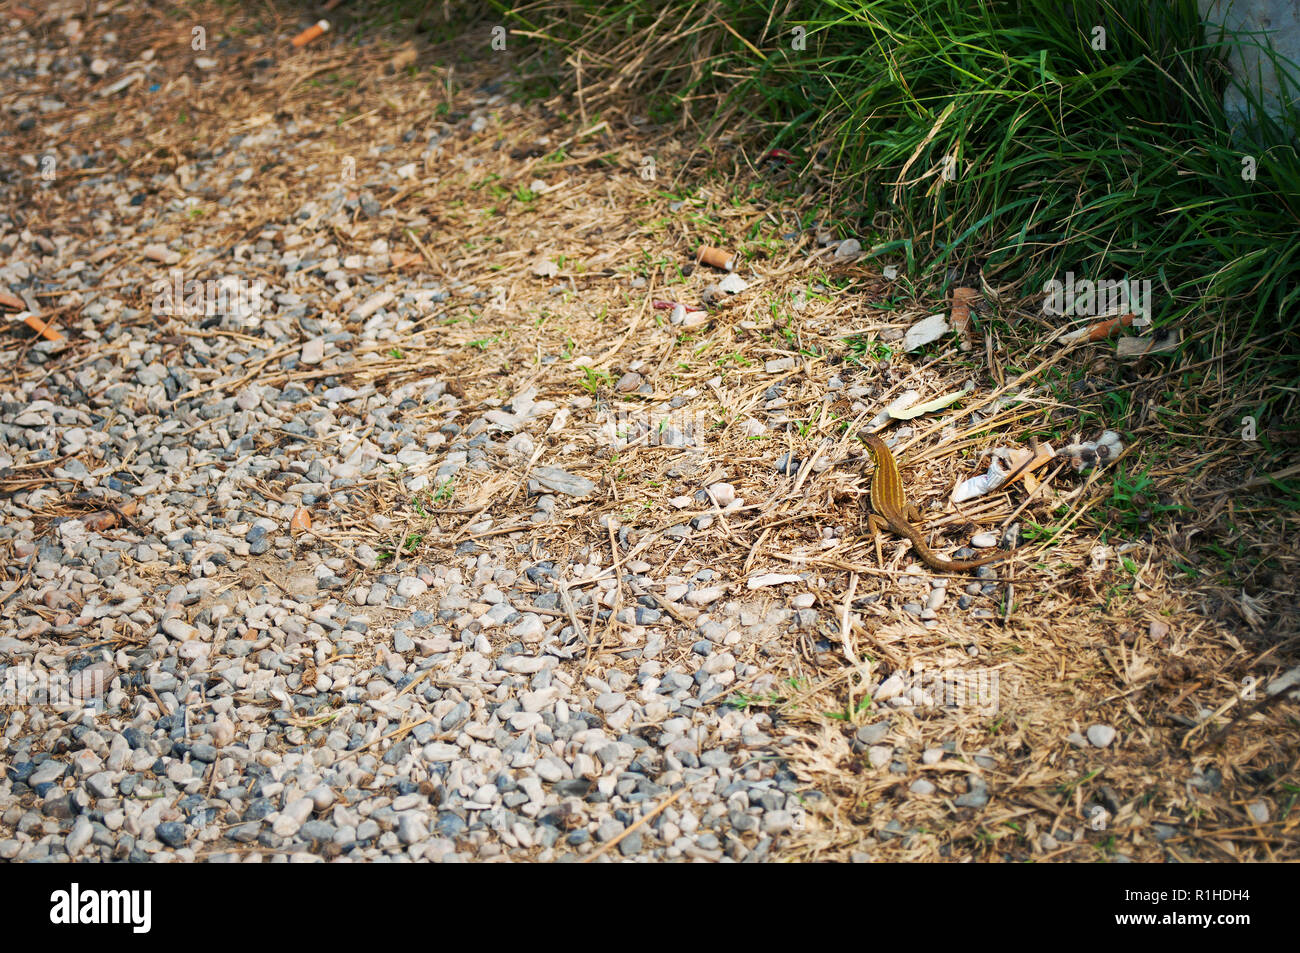 One small Italian wall lizard among pebble and green grass on a summer day Stock Photo